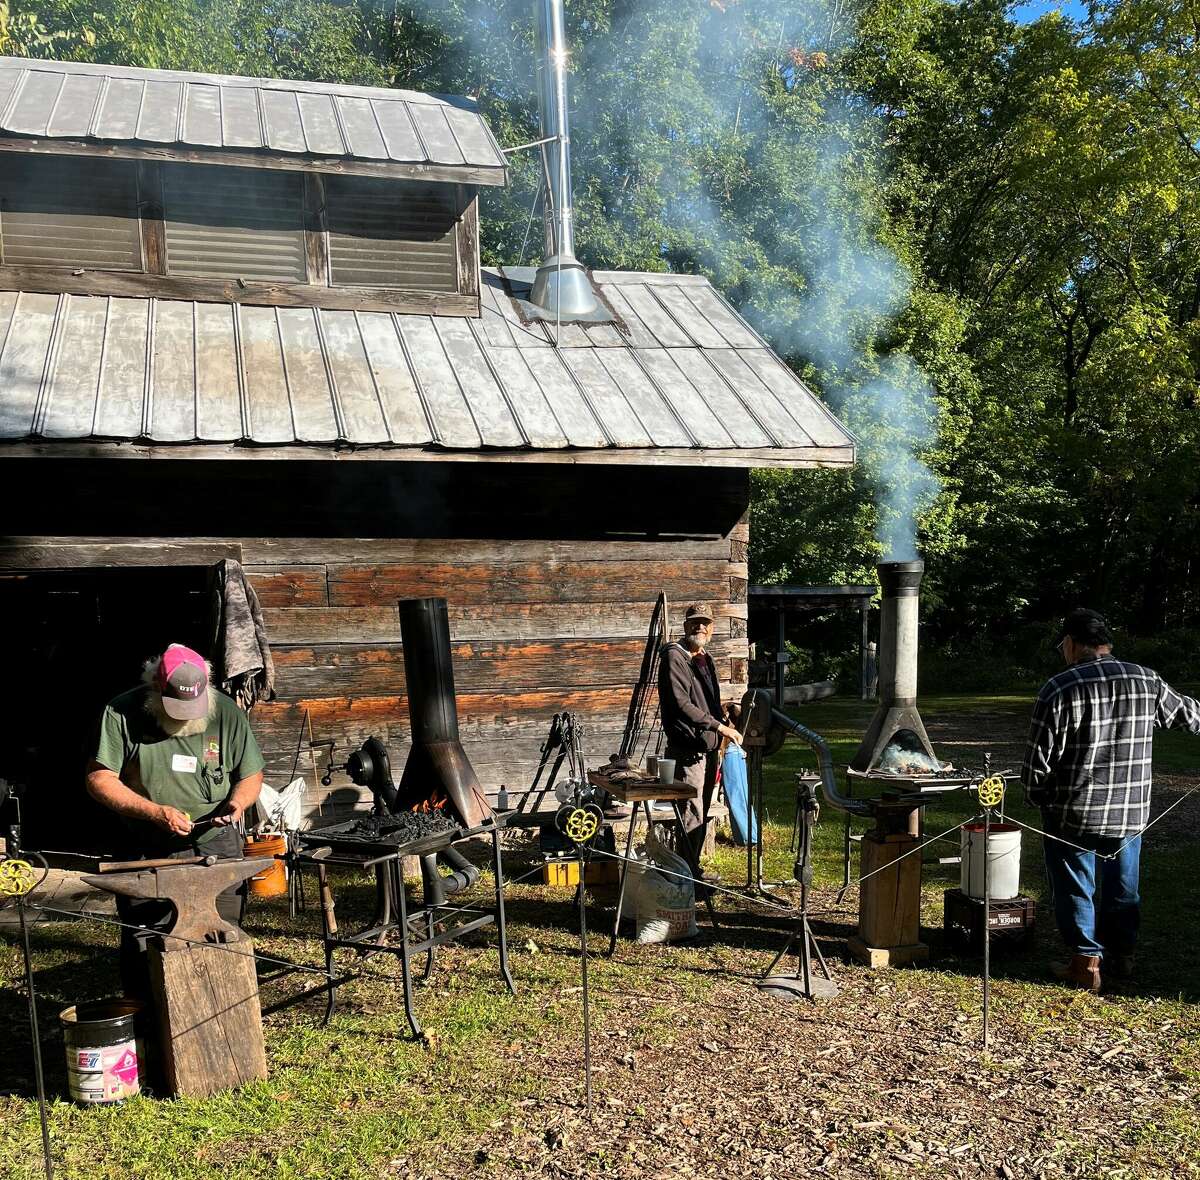 Max Carey Blacksmith Guild members work at a public event in October 2022.